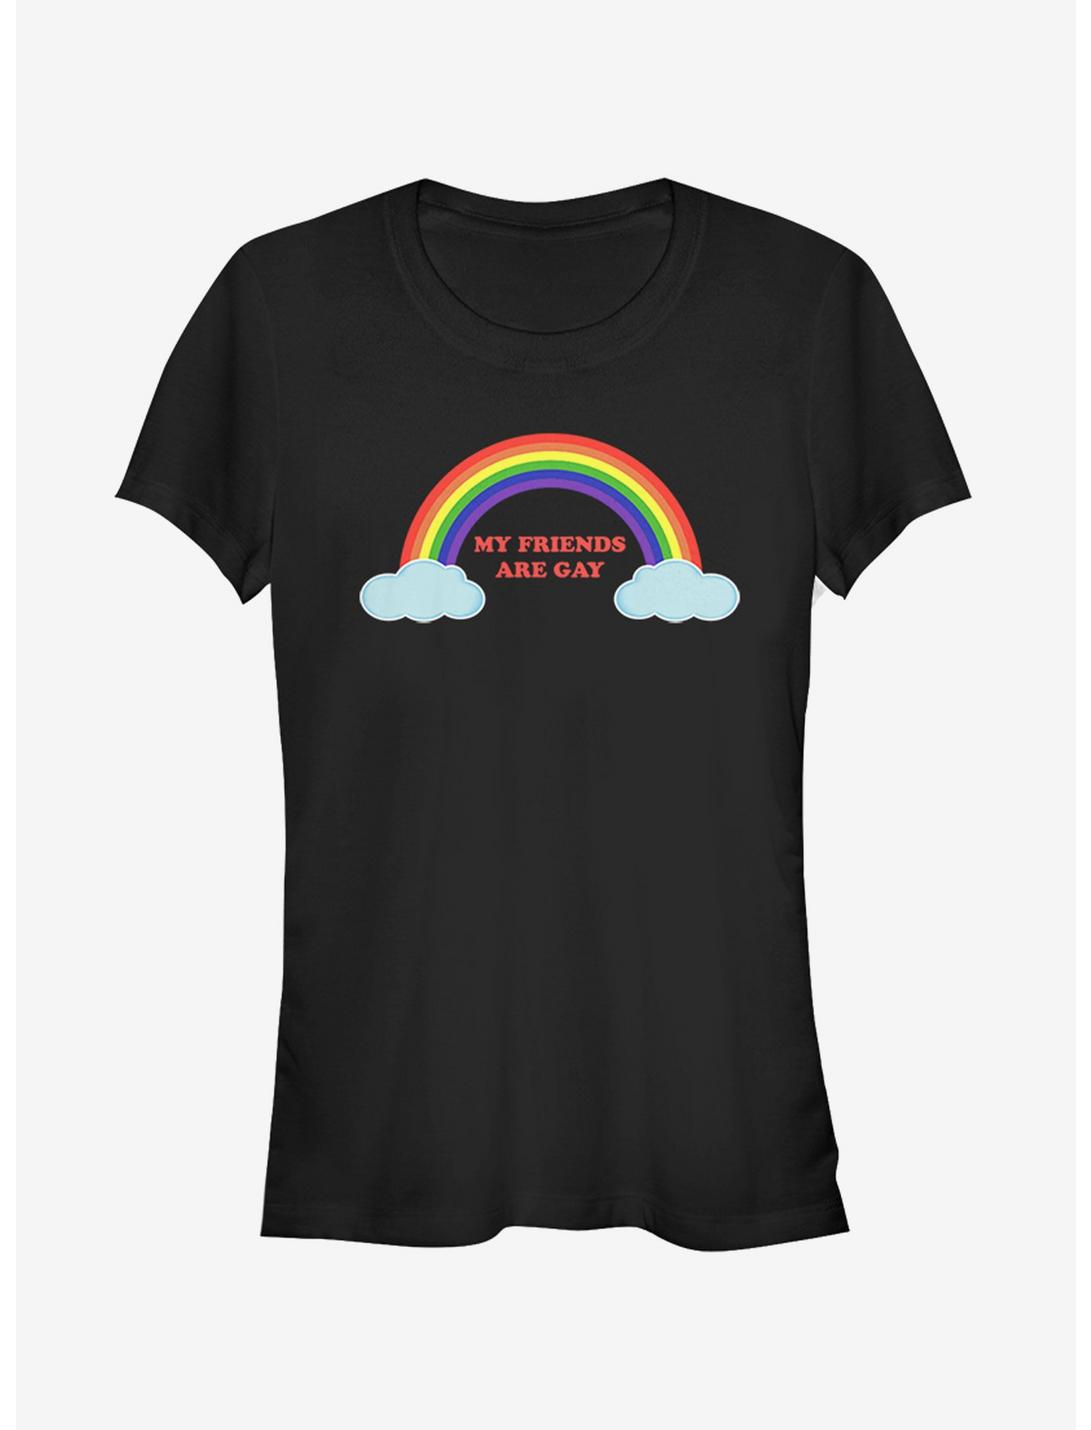 My Friends Are Gay Girl's Tee, BLACK, hi-res